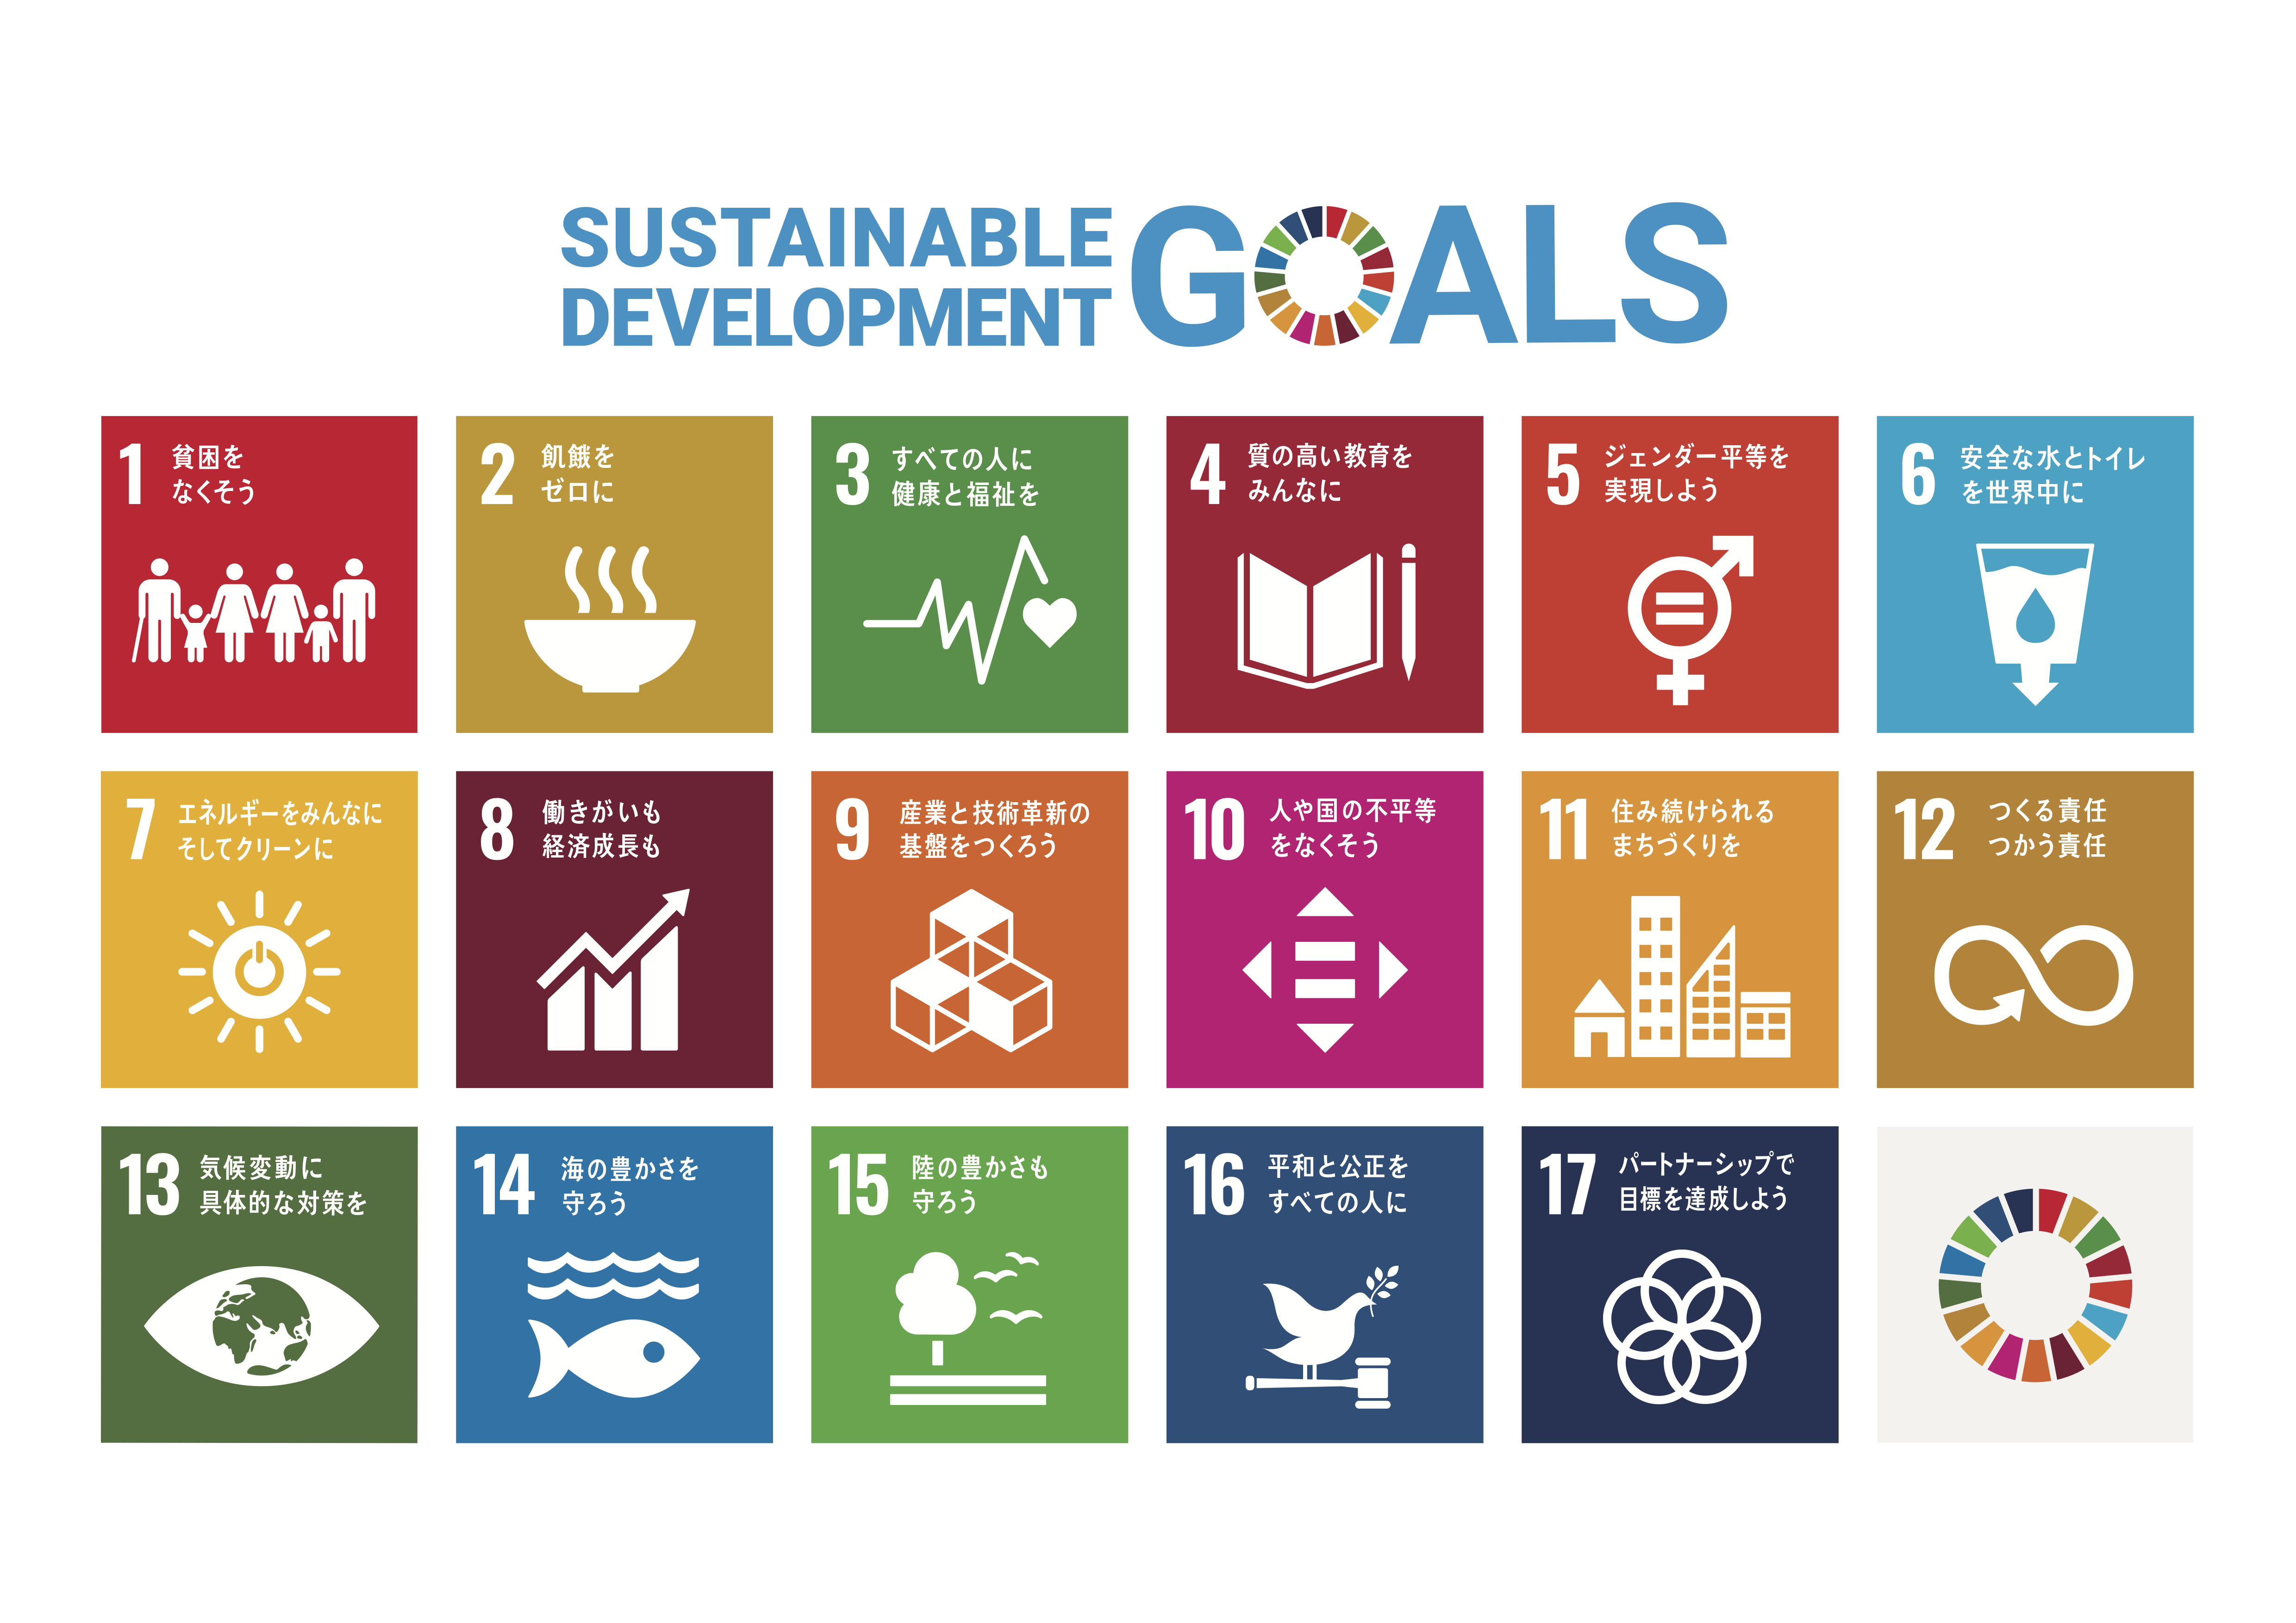 CREATE OUR SDGS PROJECT-PARTNERSHIP WITH COMPANIES AND EDUCATIONAL ORGANIZATIONS-